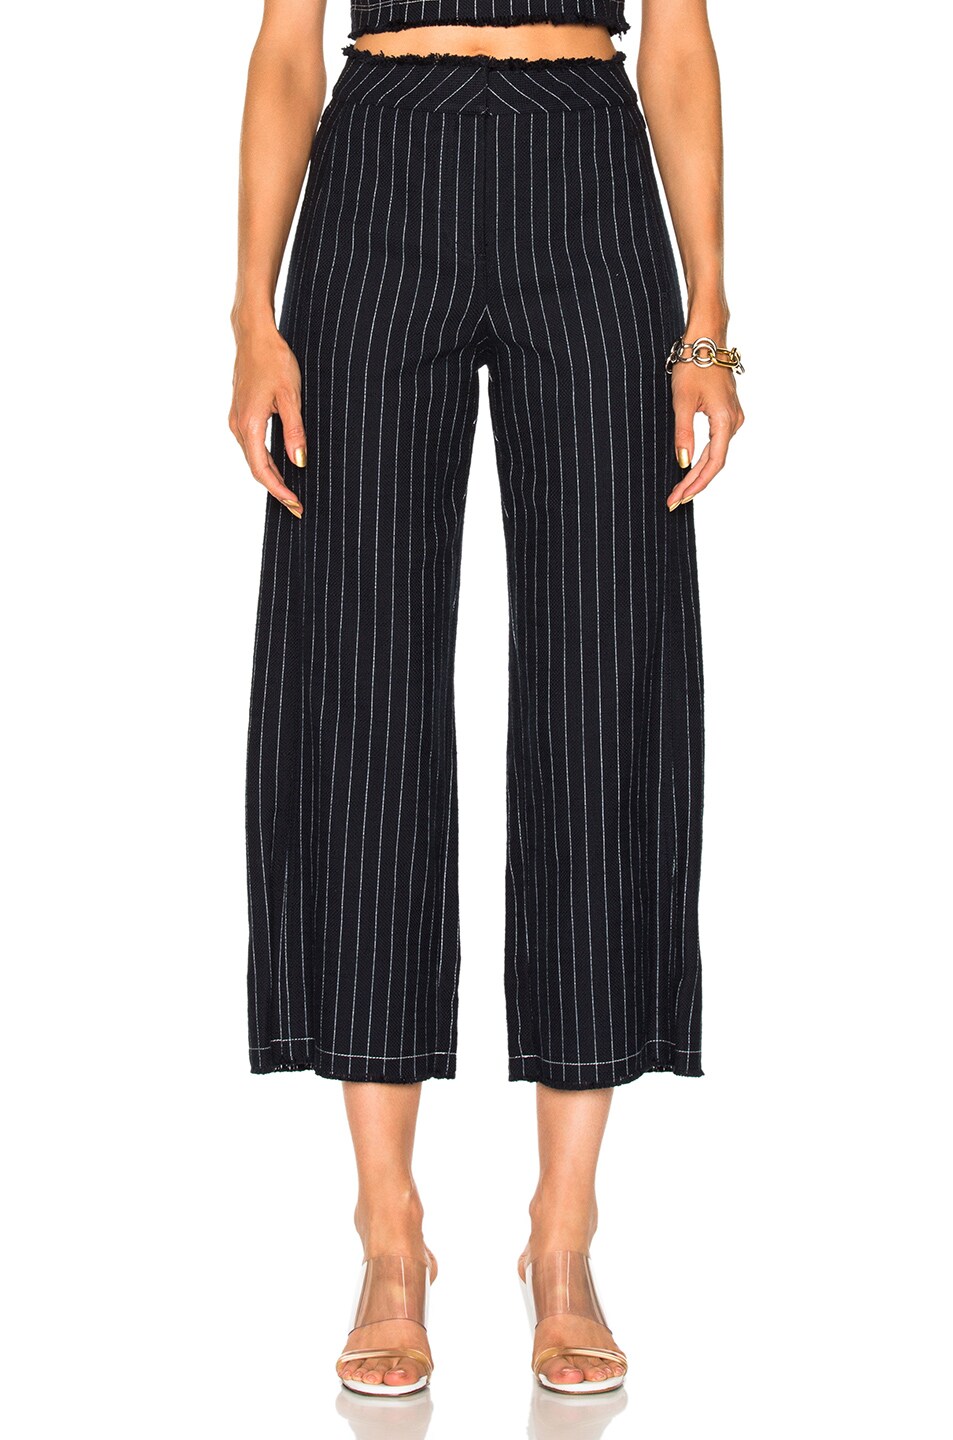 Image 1 of Alexander Wang Cotton Burlap High Waisted Cropped Pant in Navy & White Stripe